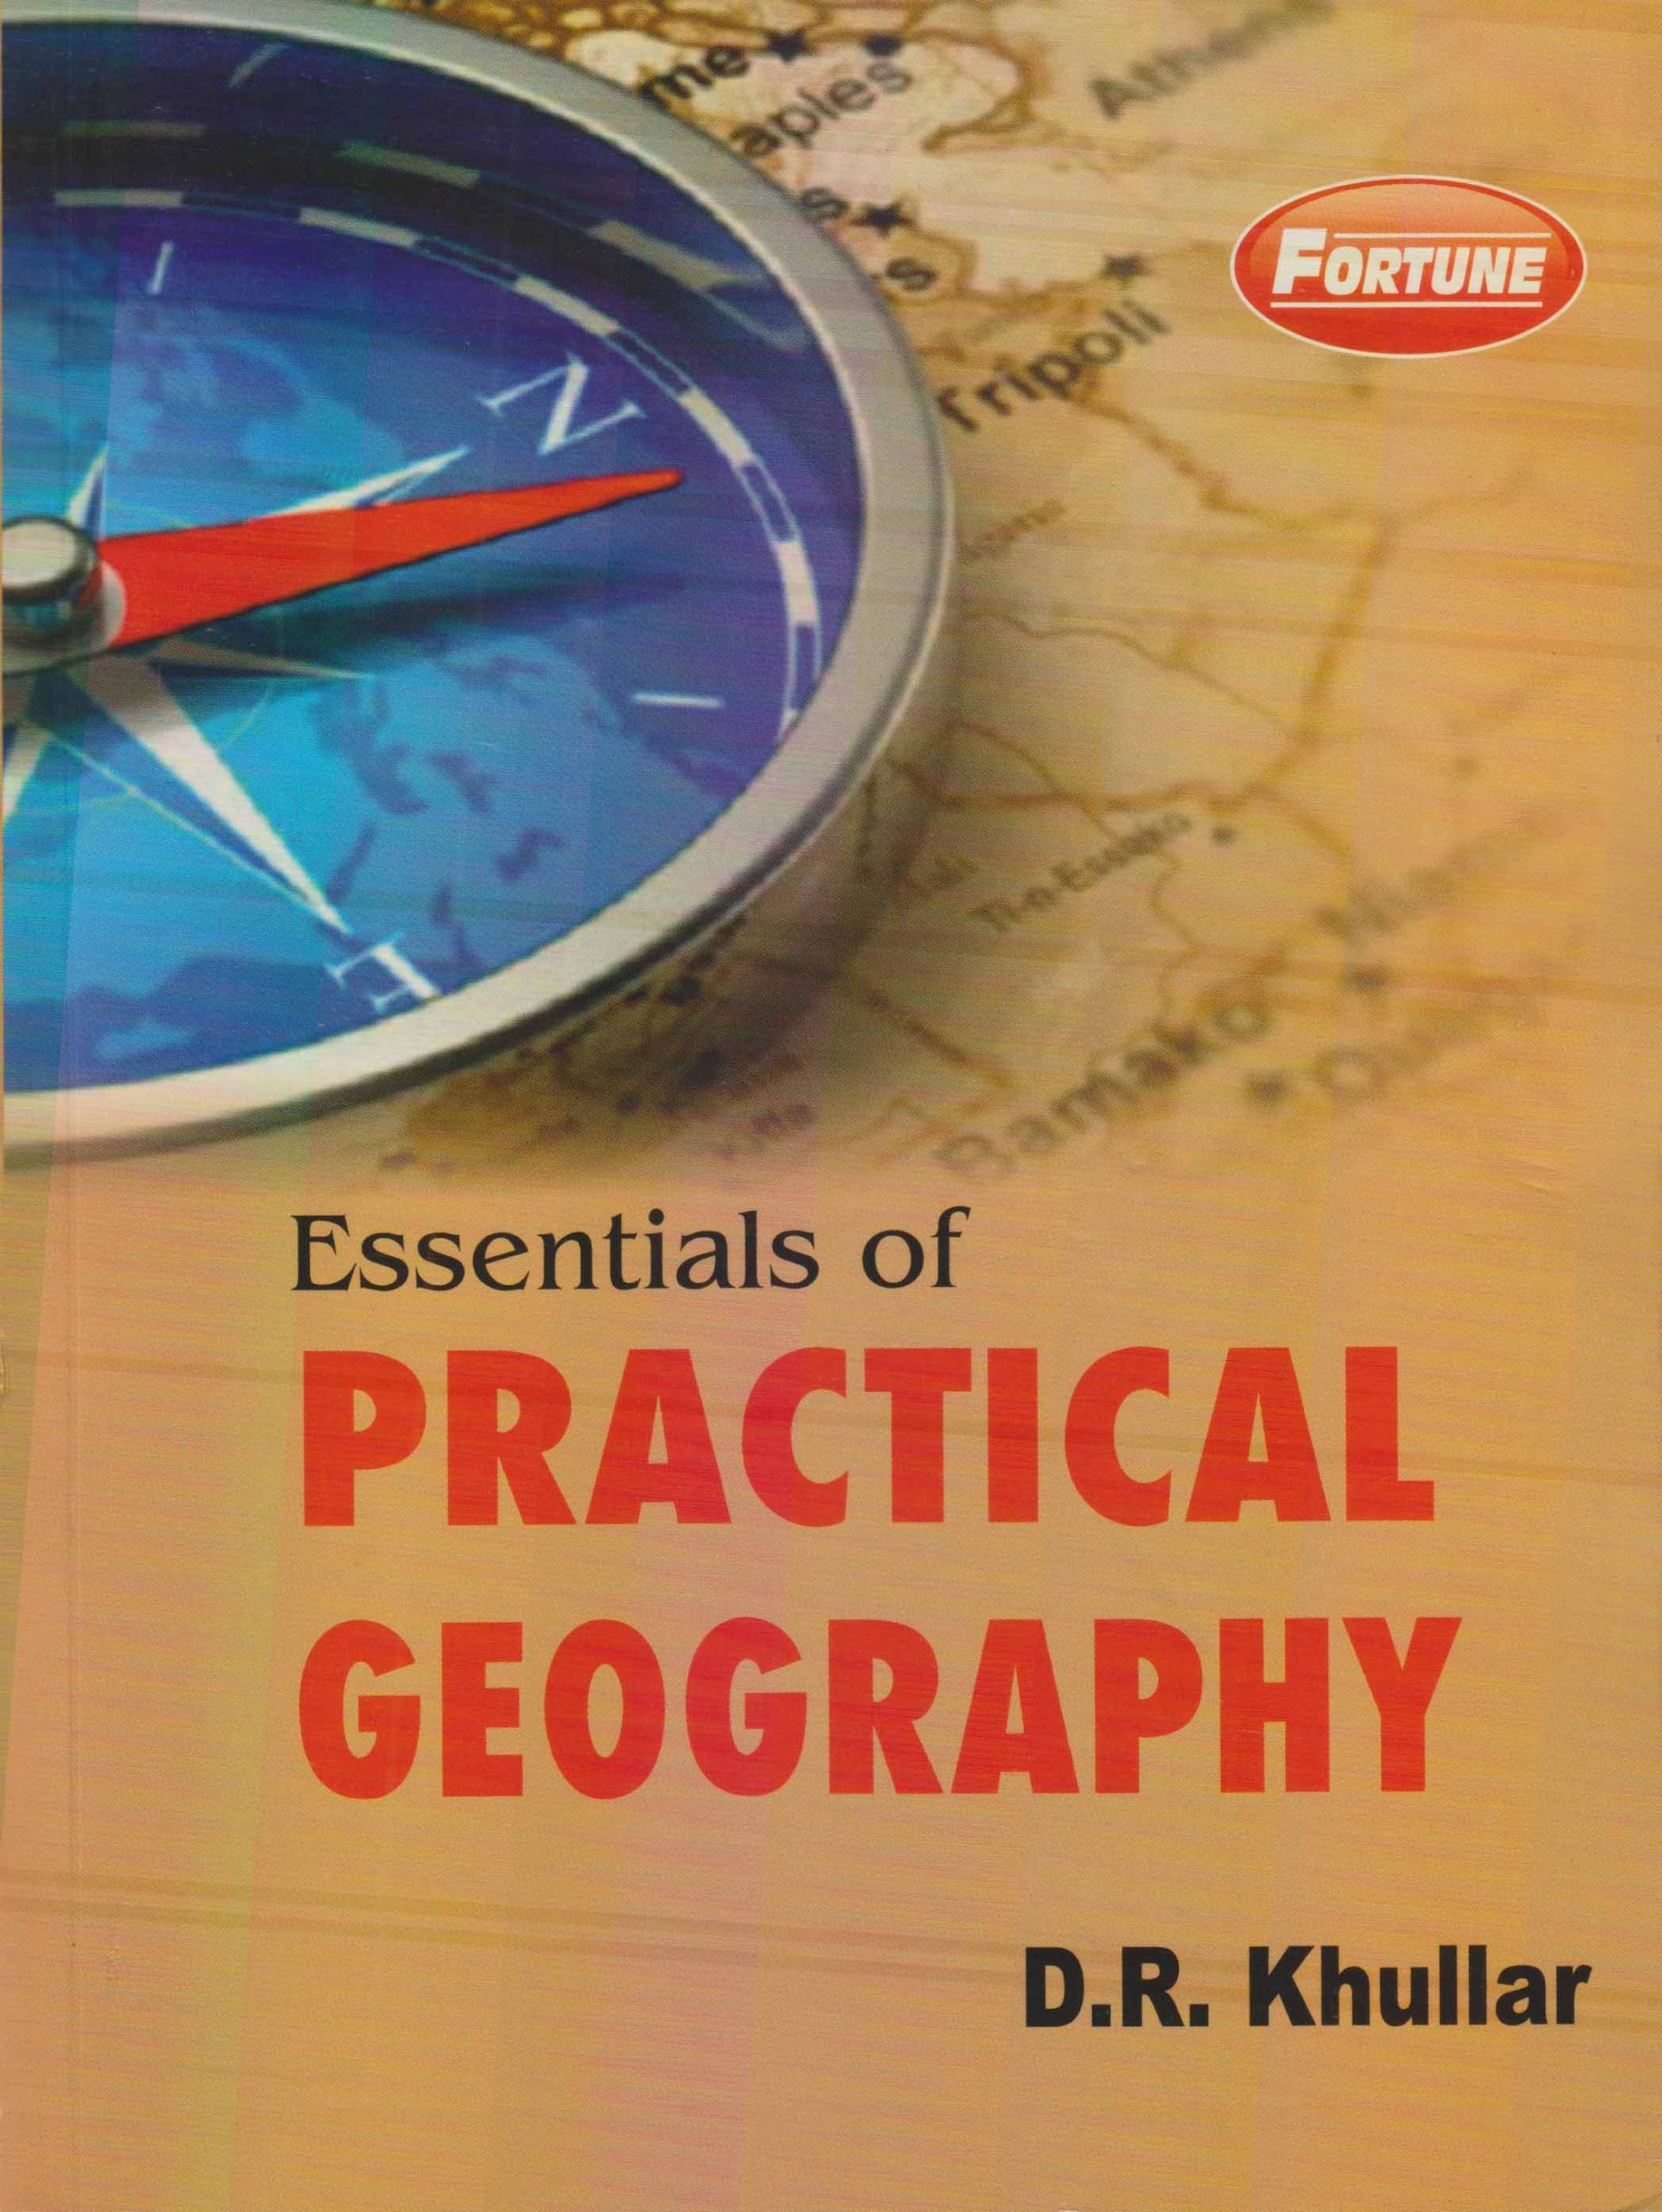 Essentials of Practical Geography by D.R. Khullar